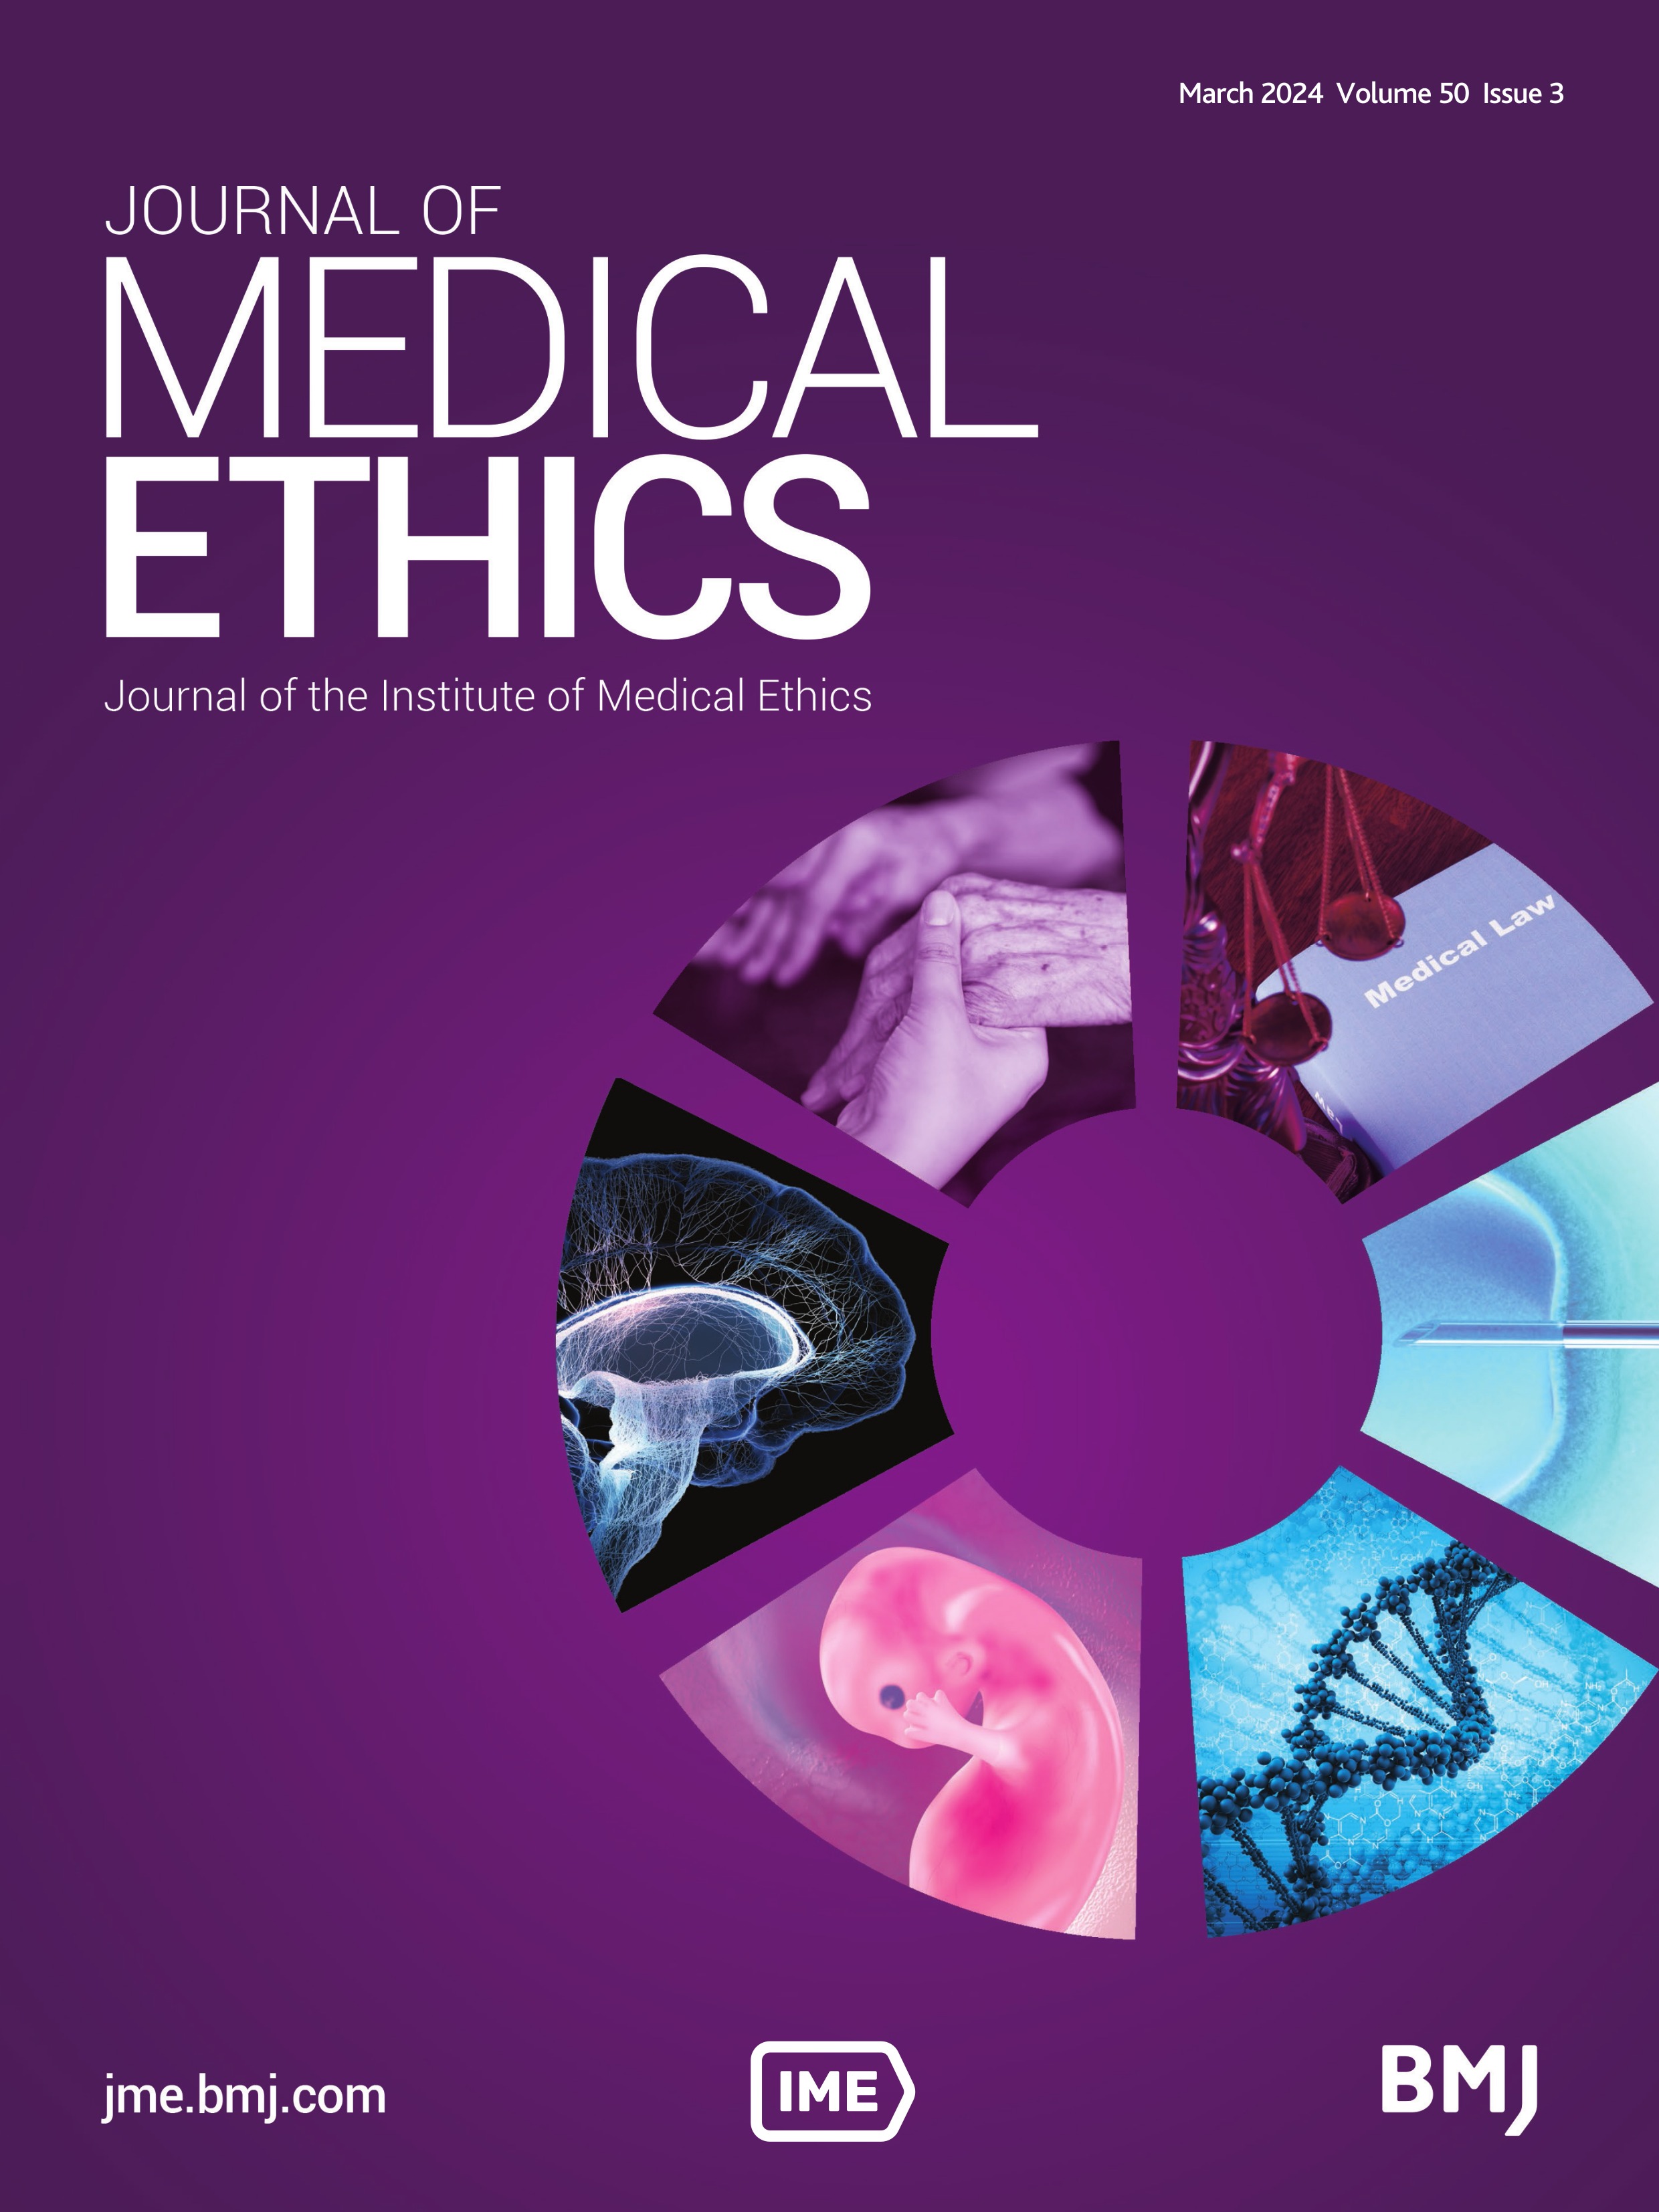 The revised International Code of Medical Ethics: responses to some important questions